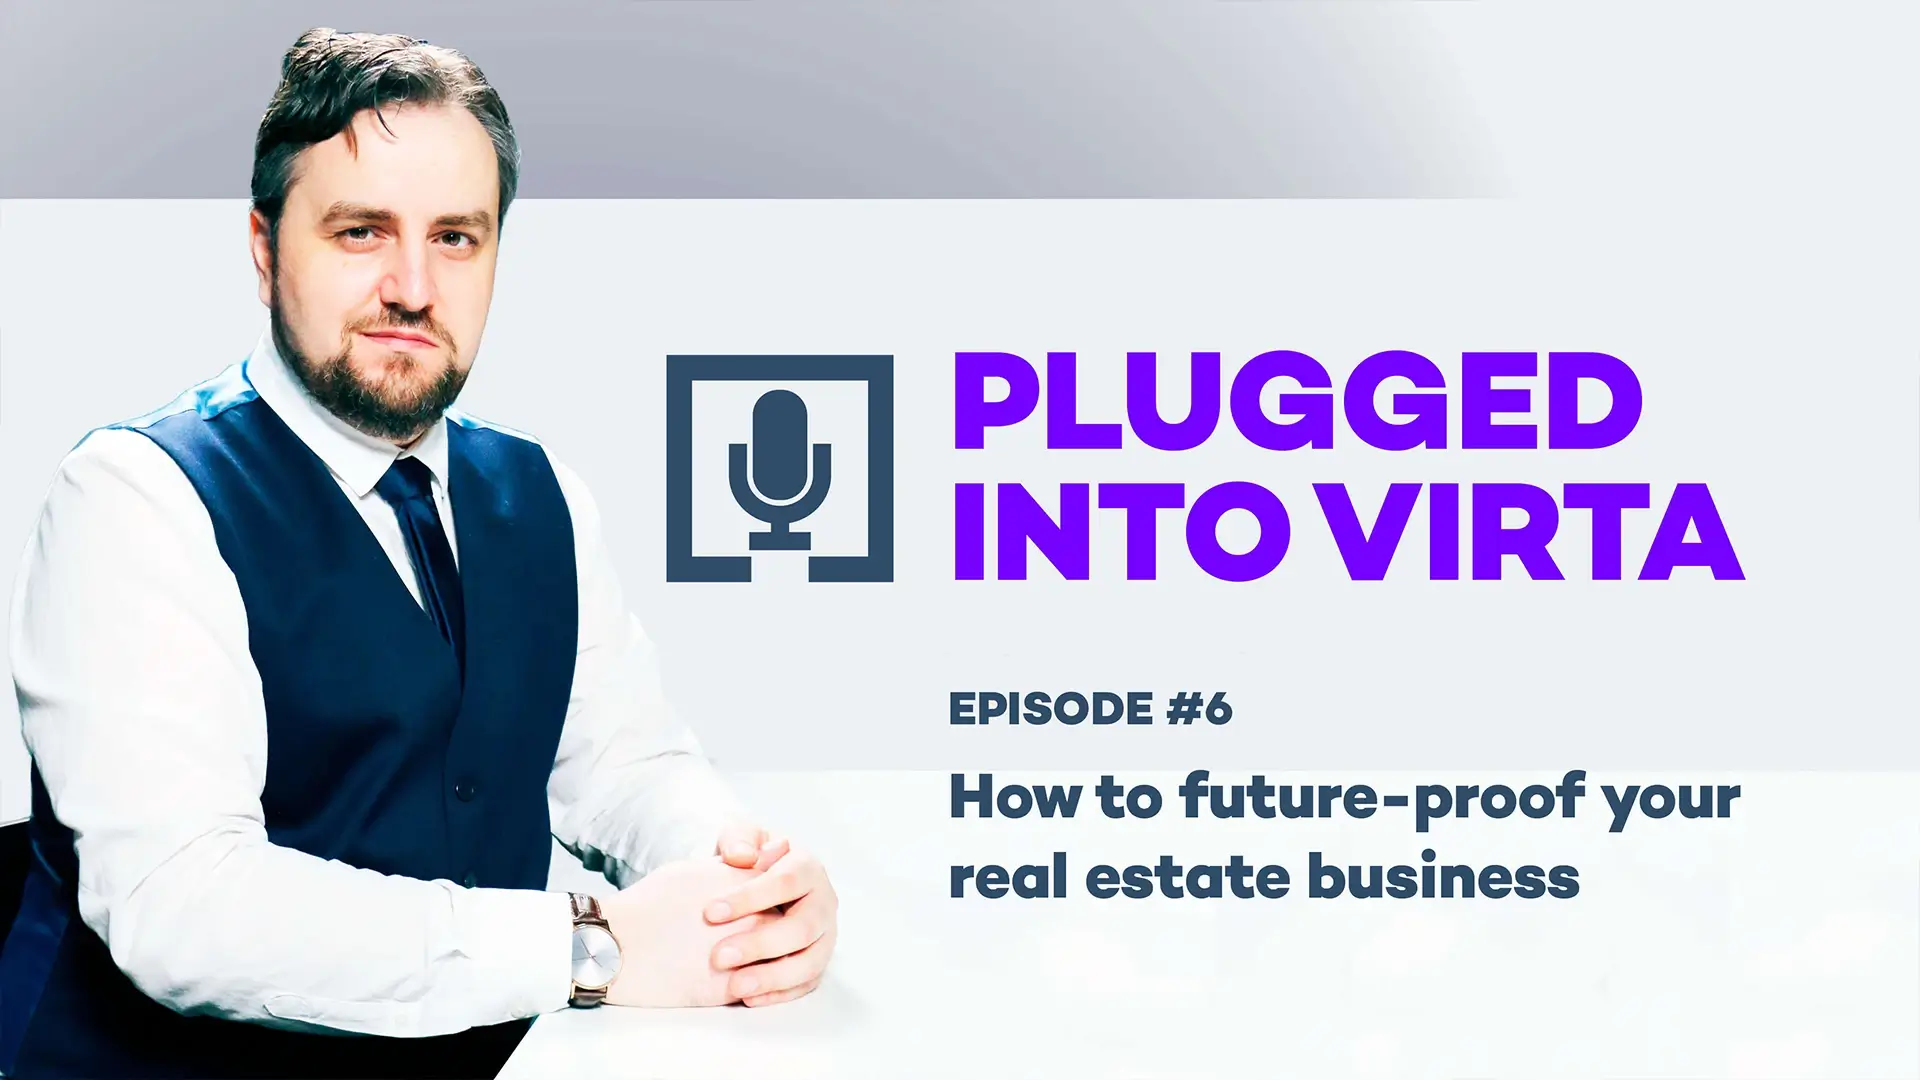 Plugged into Virta Episode 6 How to supercharge your real estate business